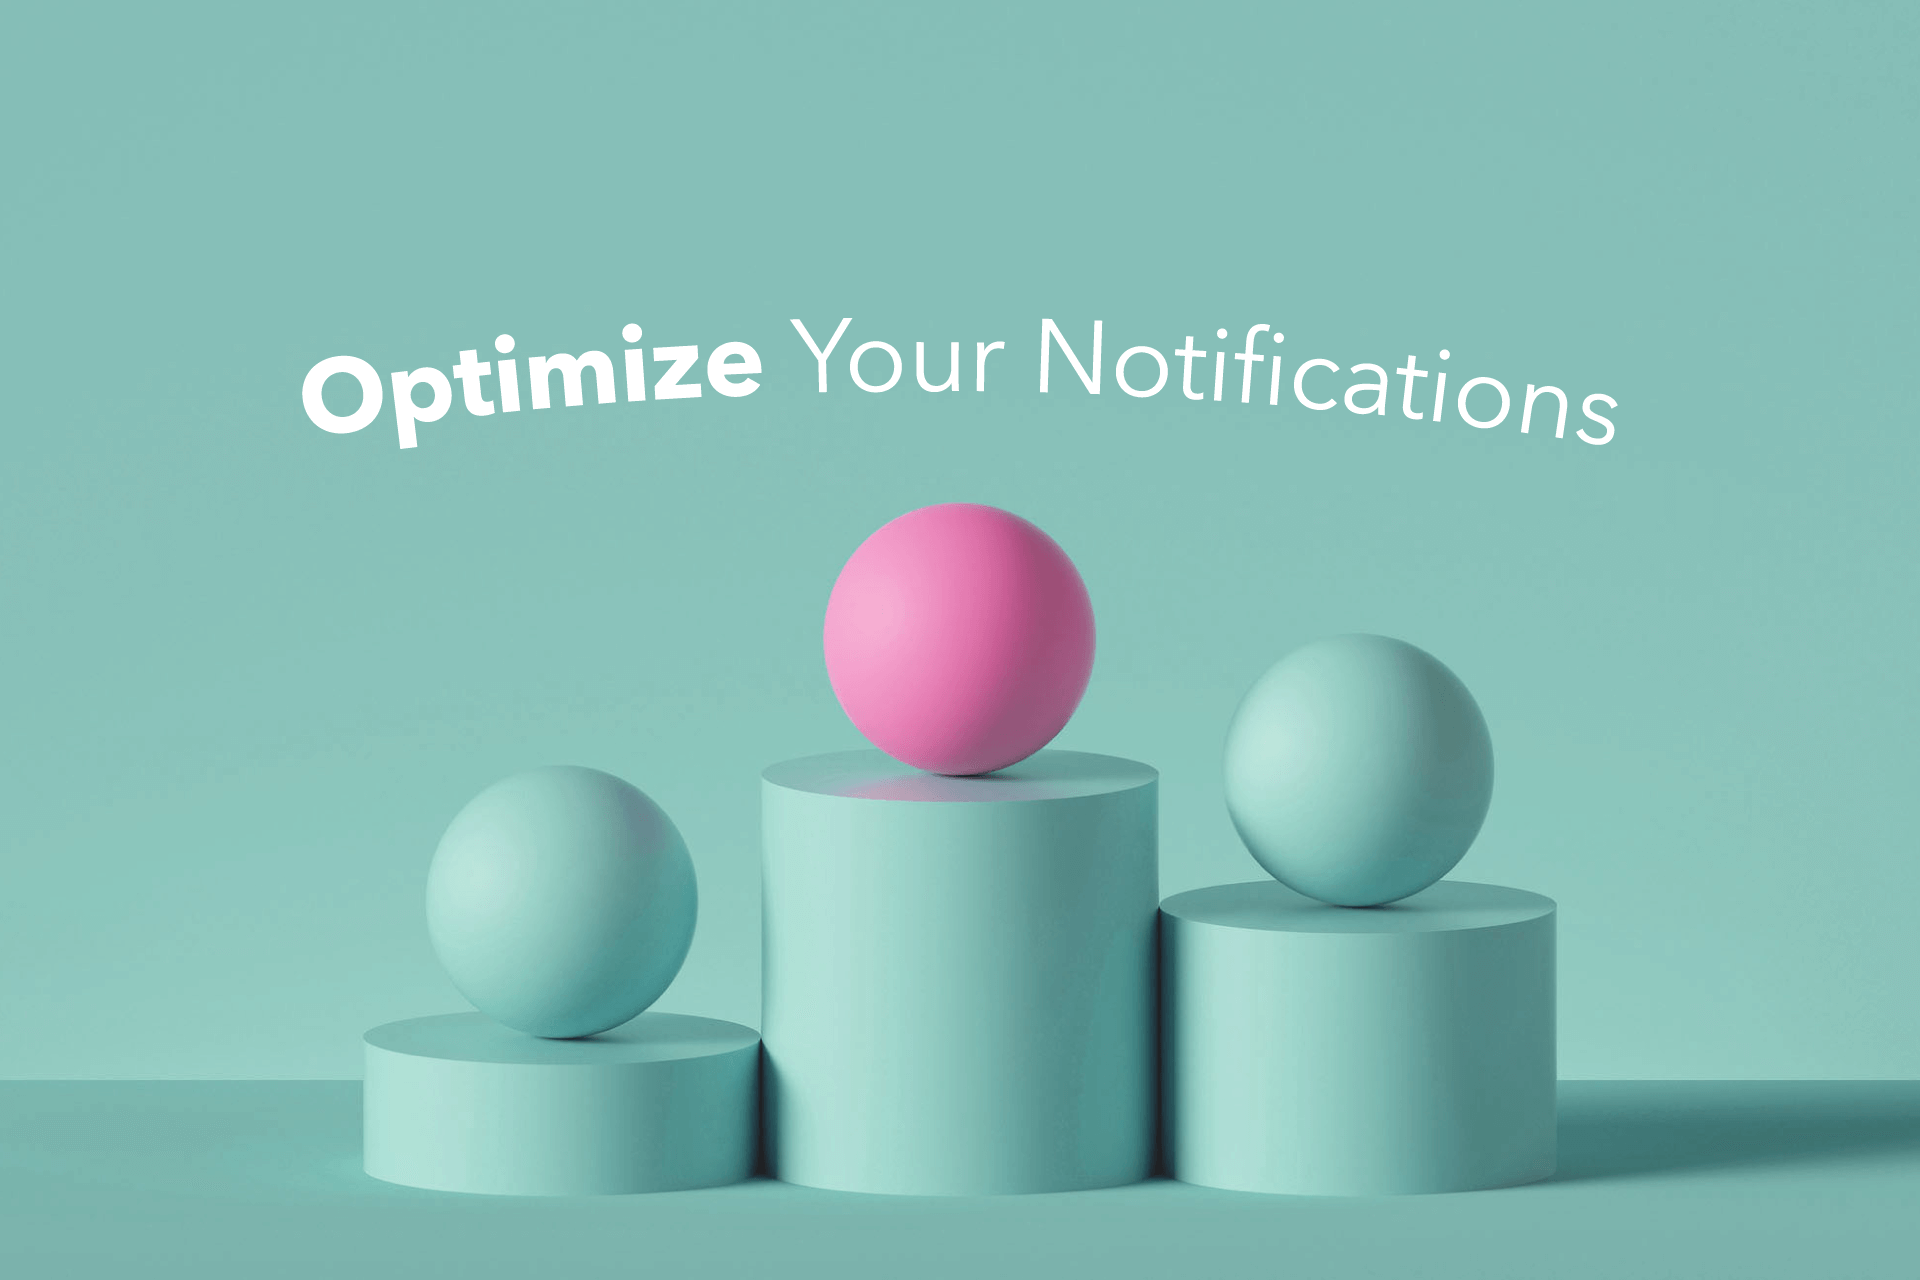 How to Increase Click-Through Rates With Push Notifications and In-App Messaging